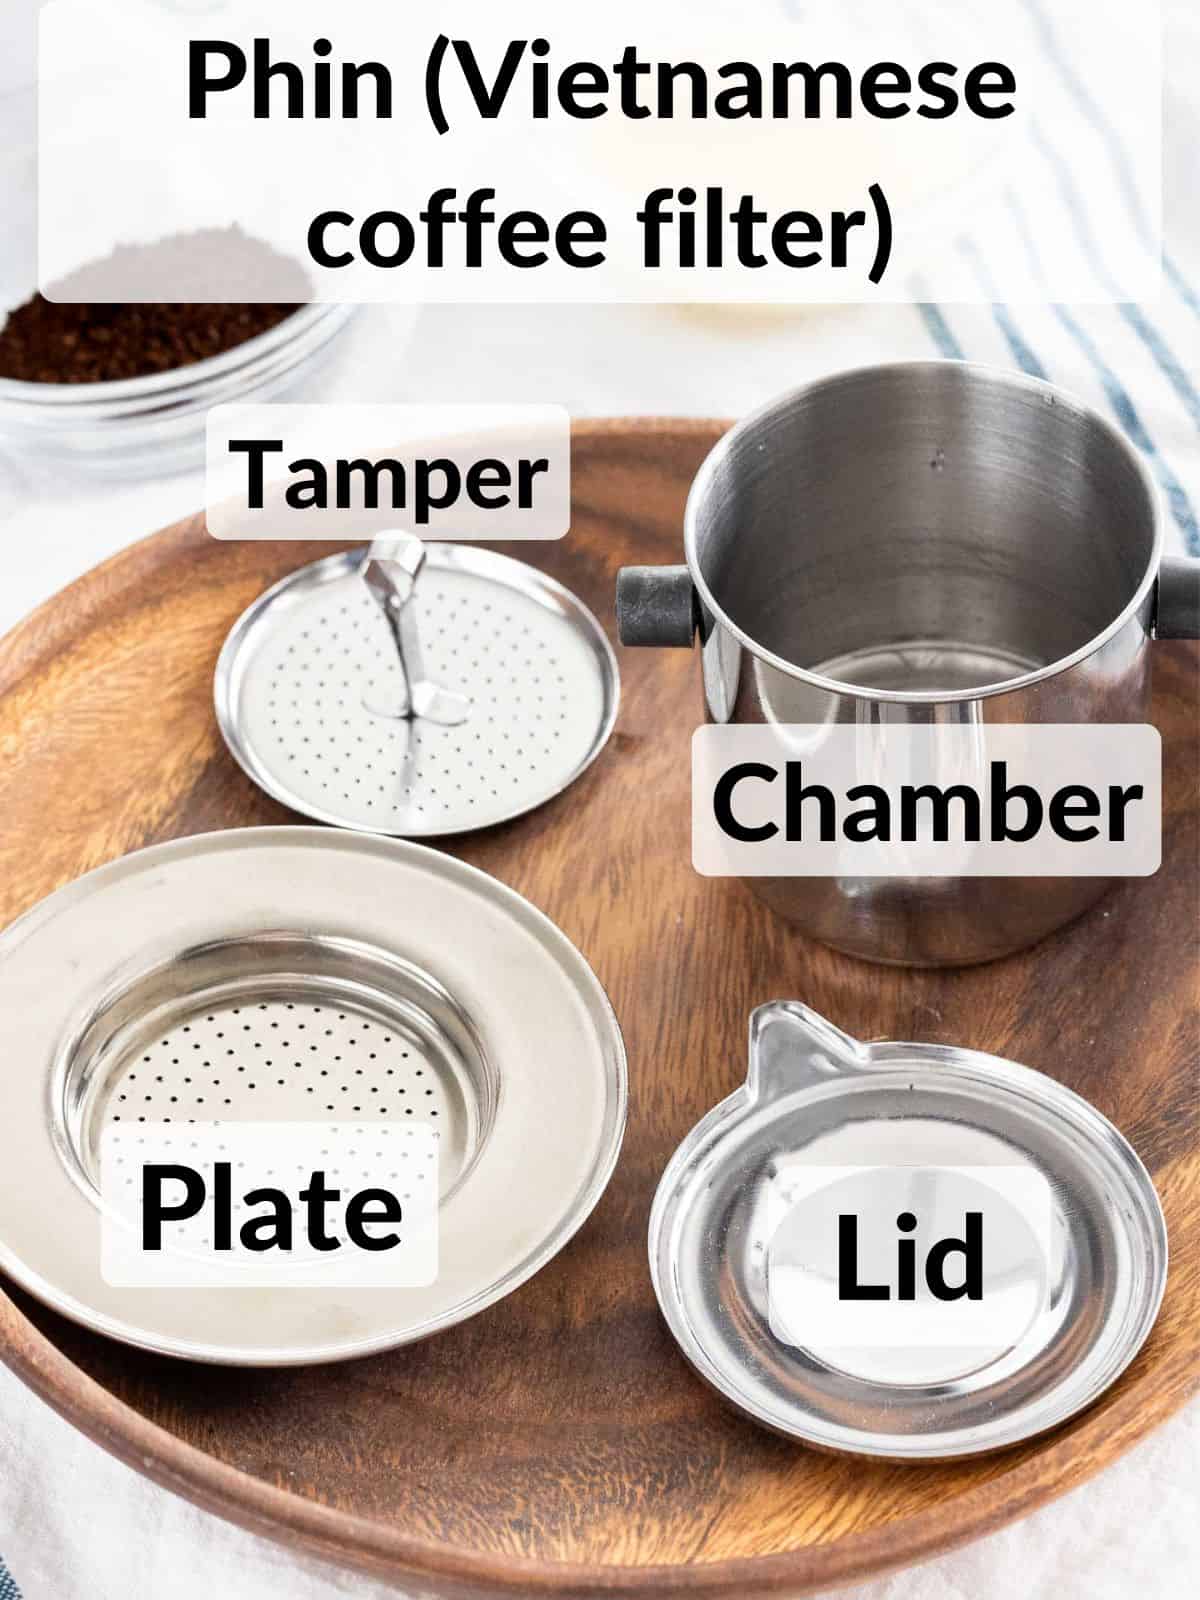 All parts of a phin filter or Vietnamese coffee filter.